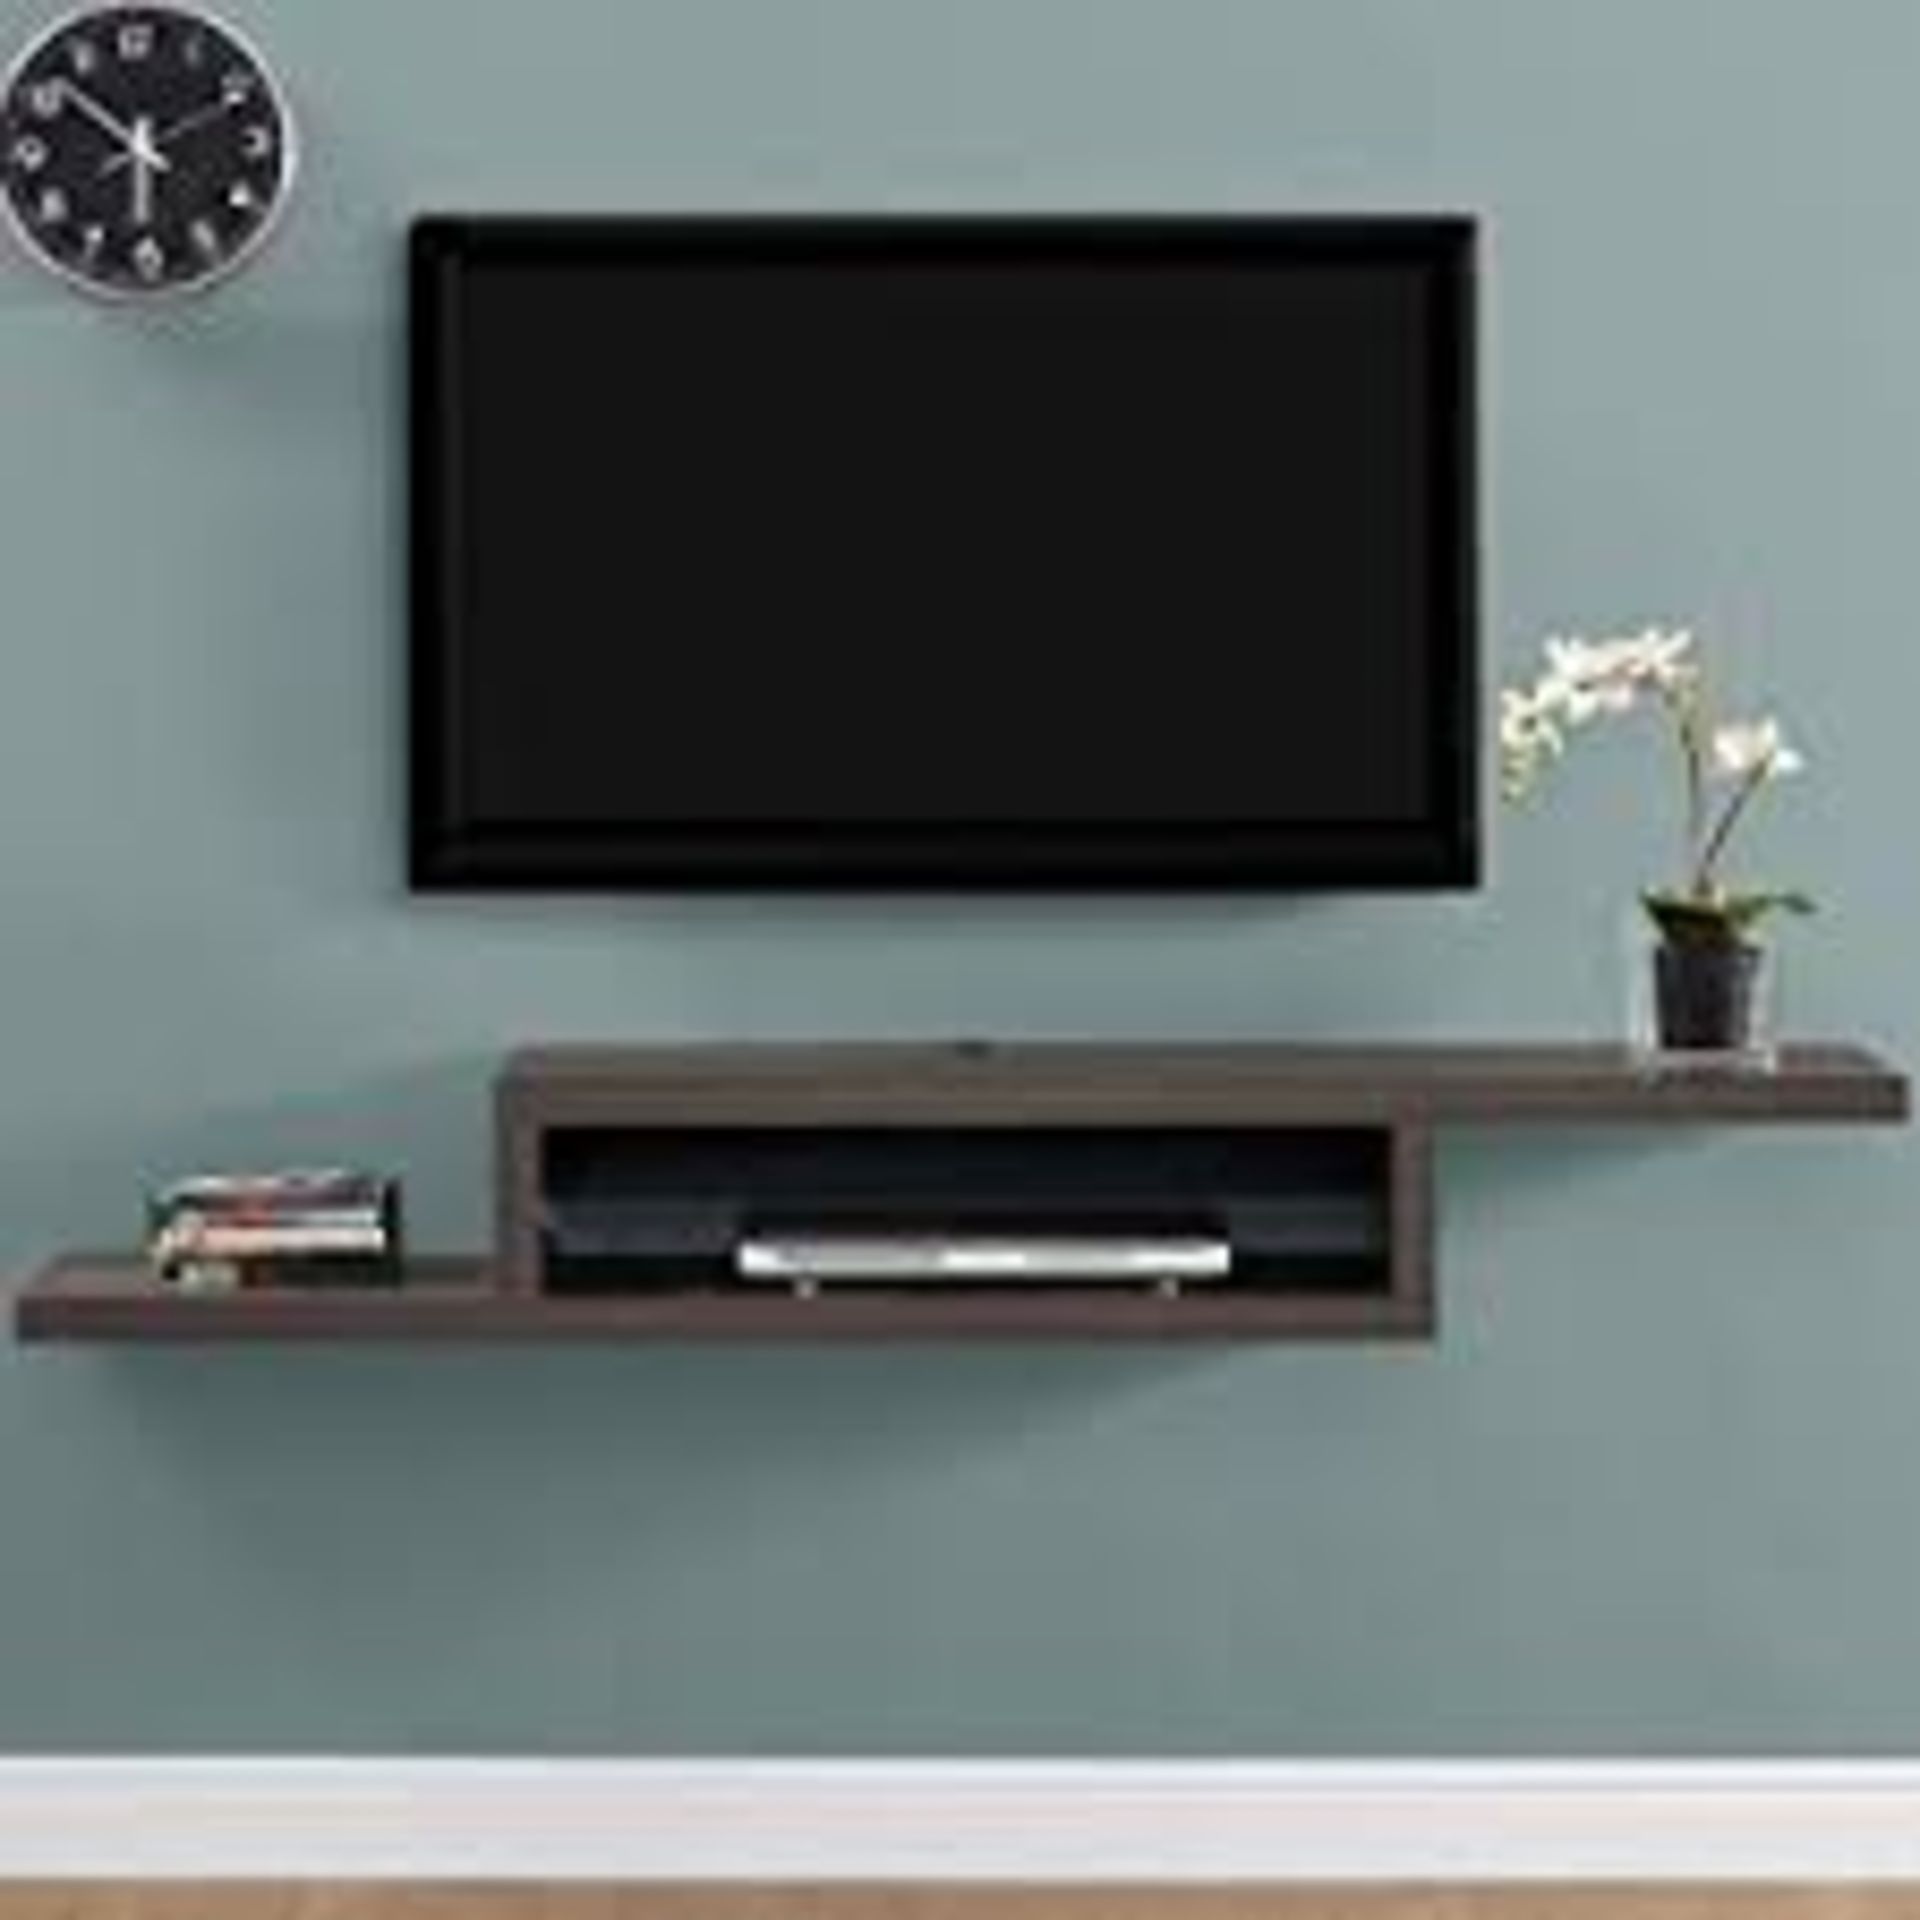 Boxed Skyline Designer Wall Console Mounted Tv Stand RRP £175 (19199)